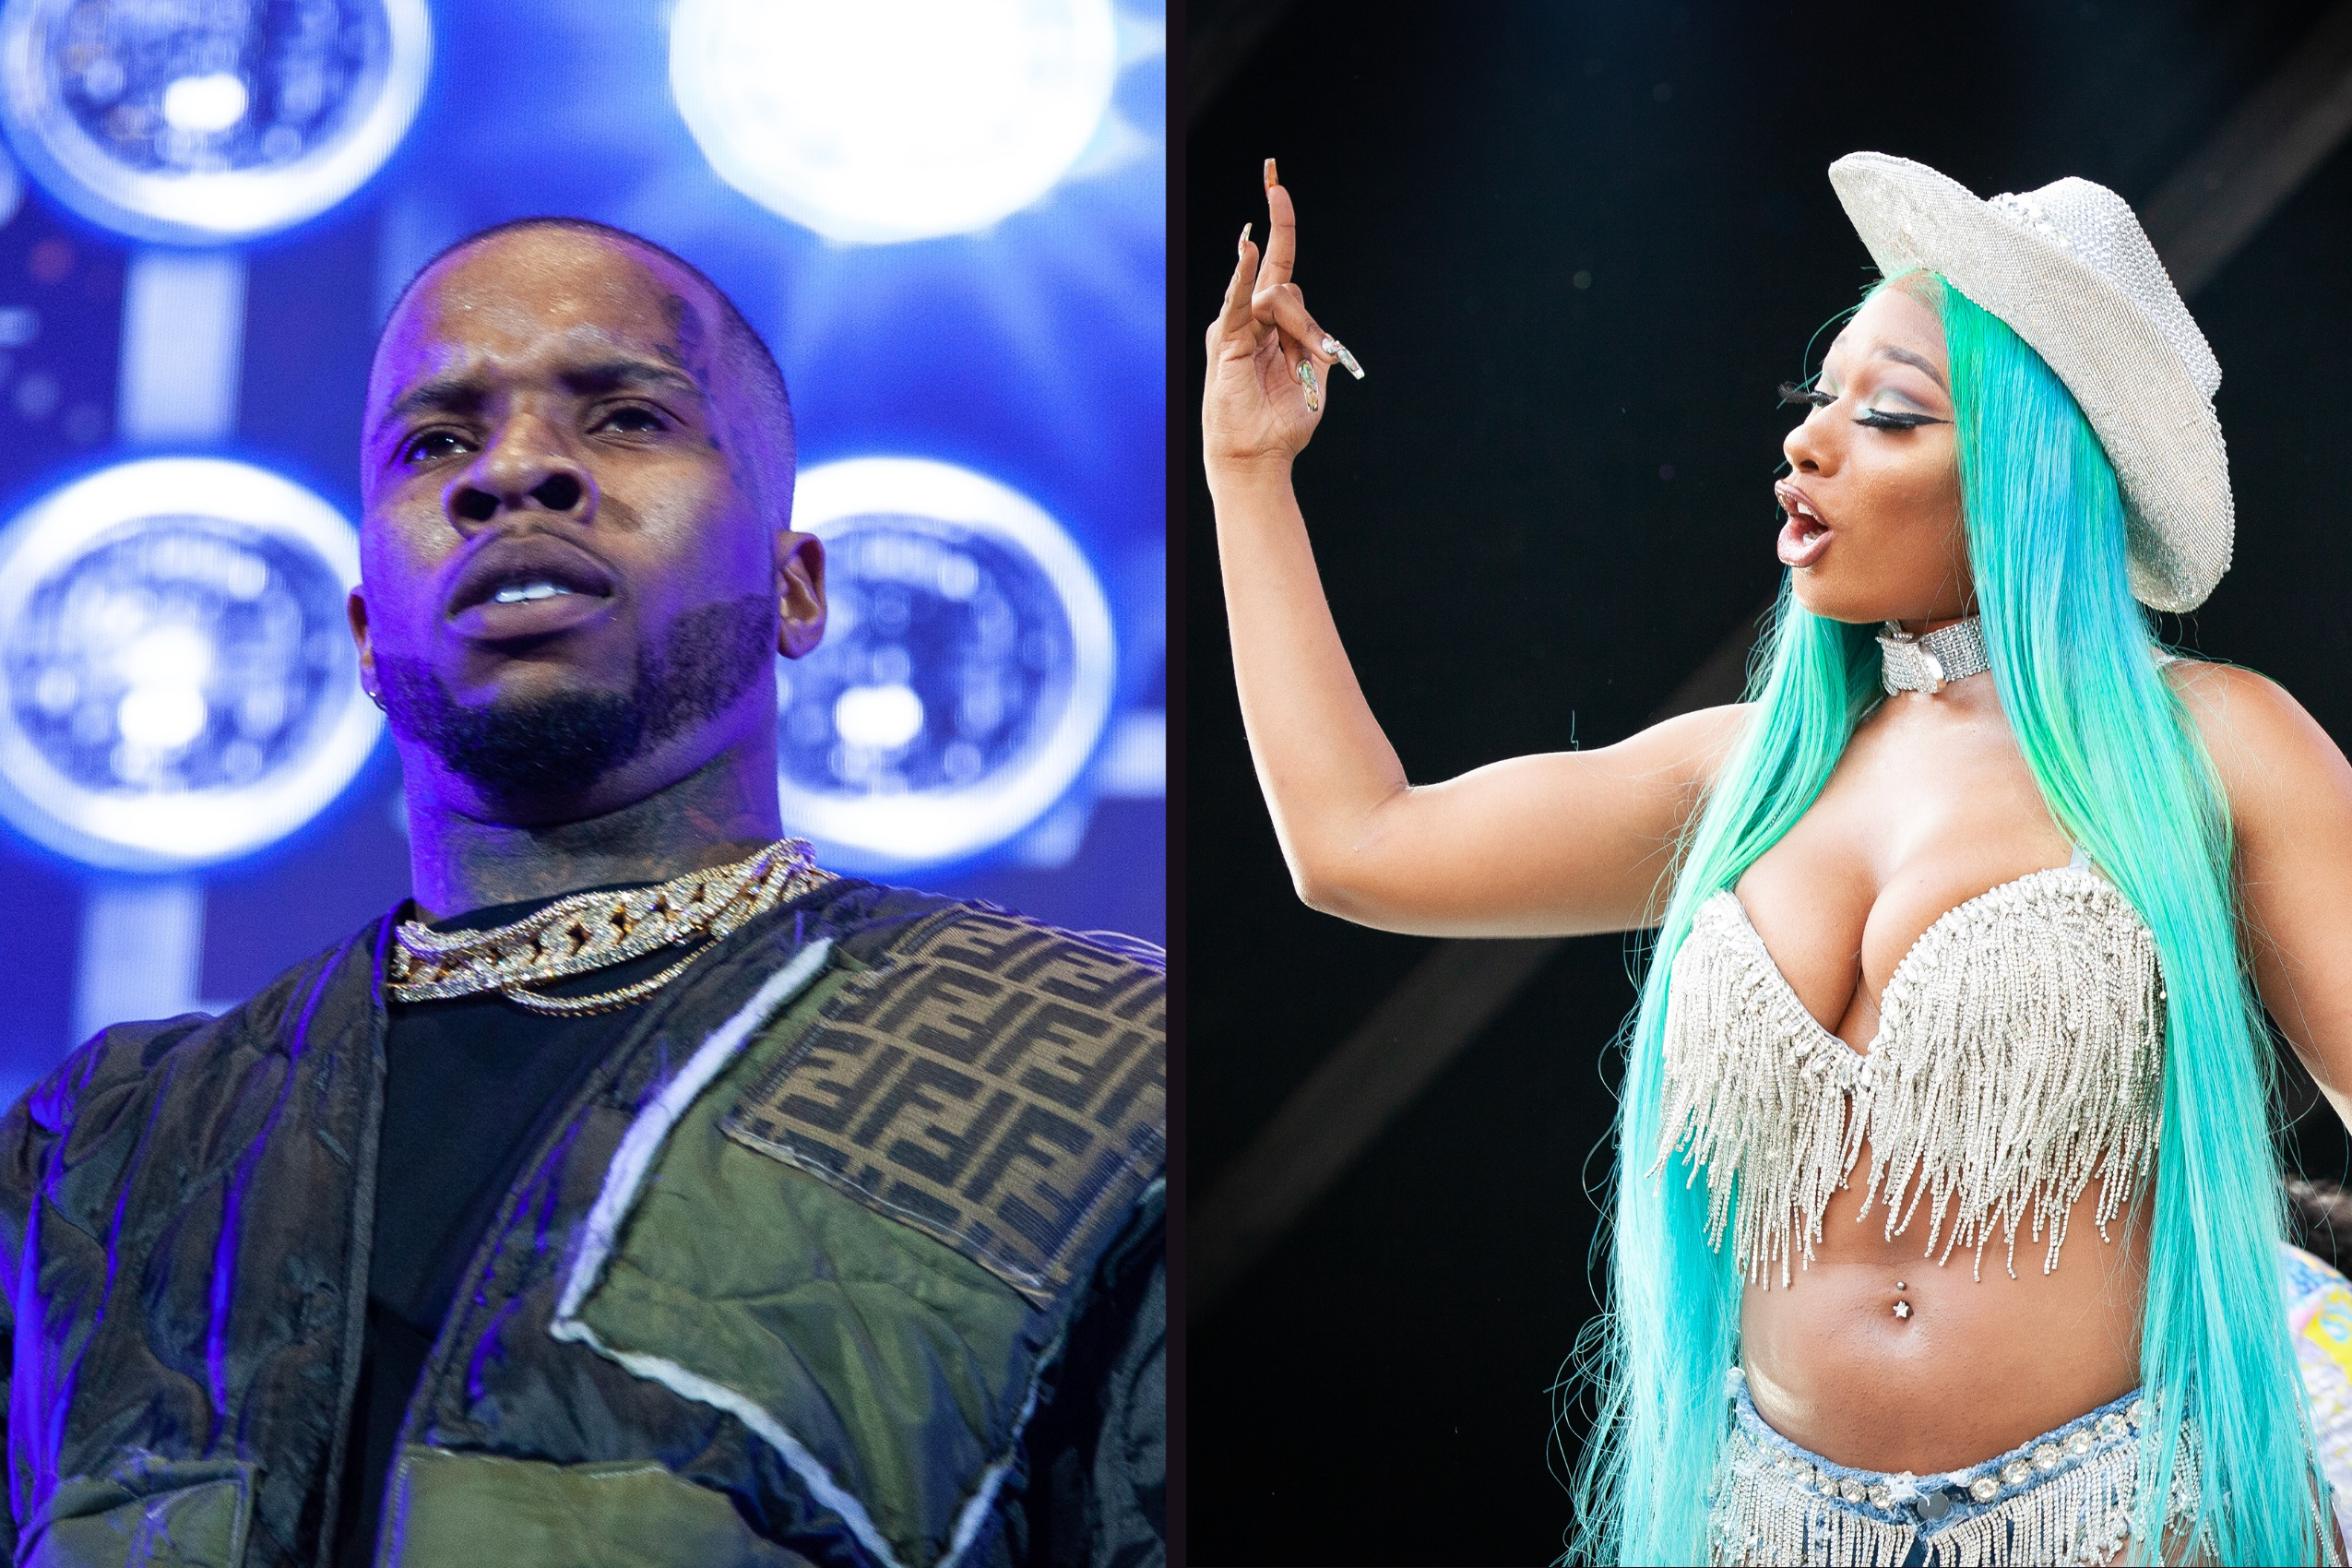 Charges Against Tory Lanez Have Not Been Dropped By Megan Thee Stallion